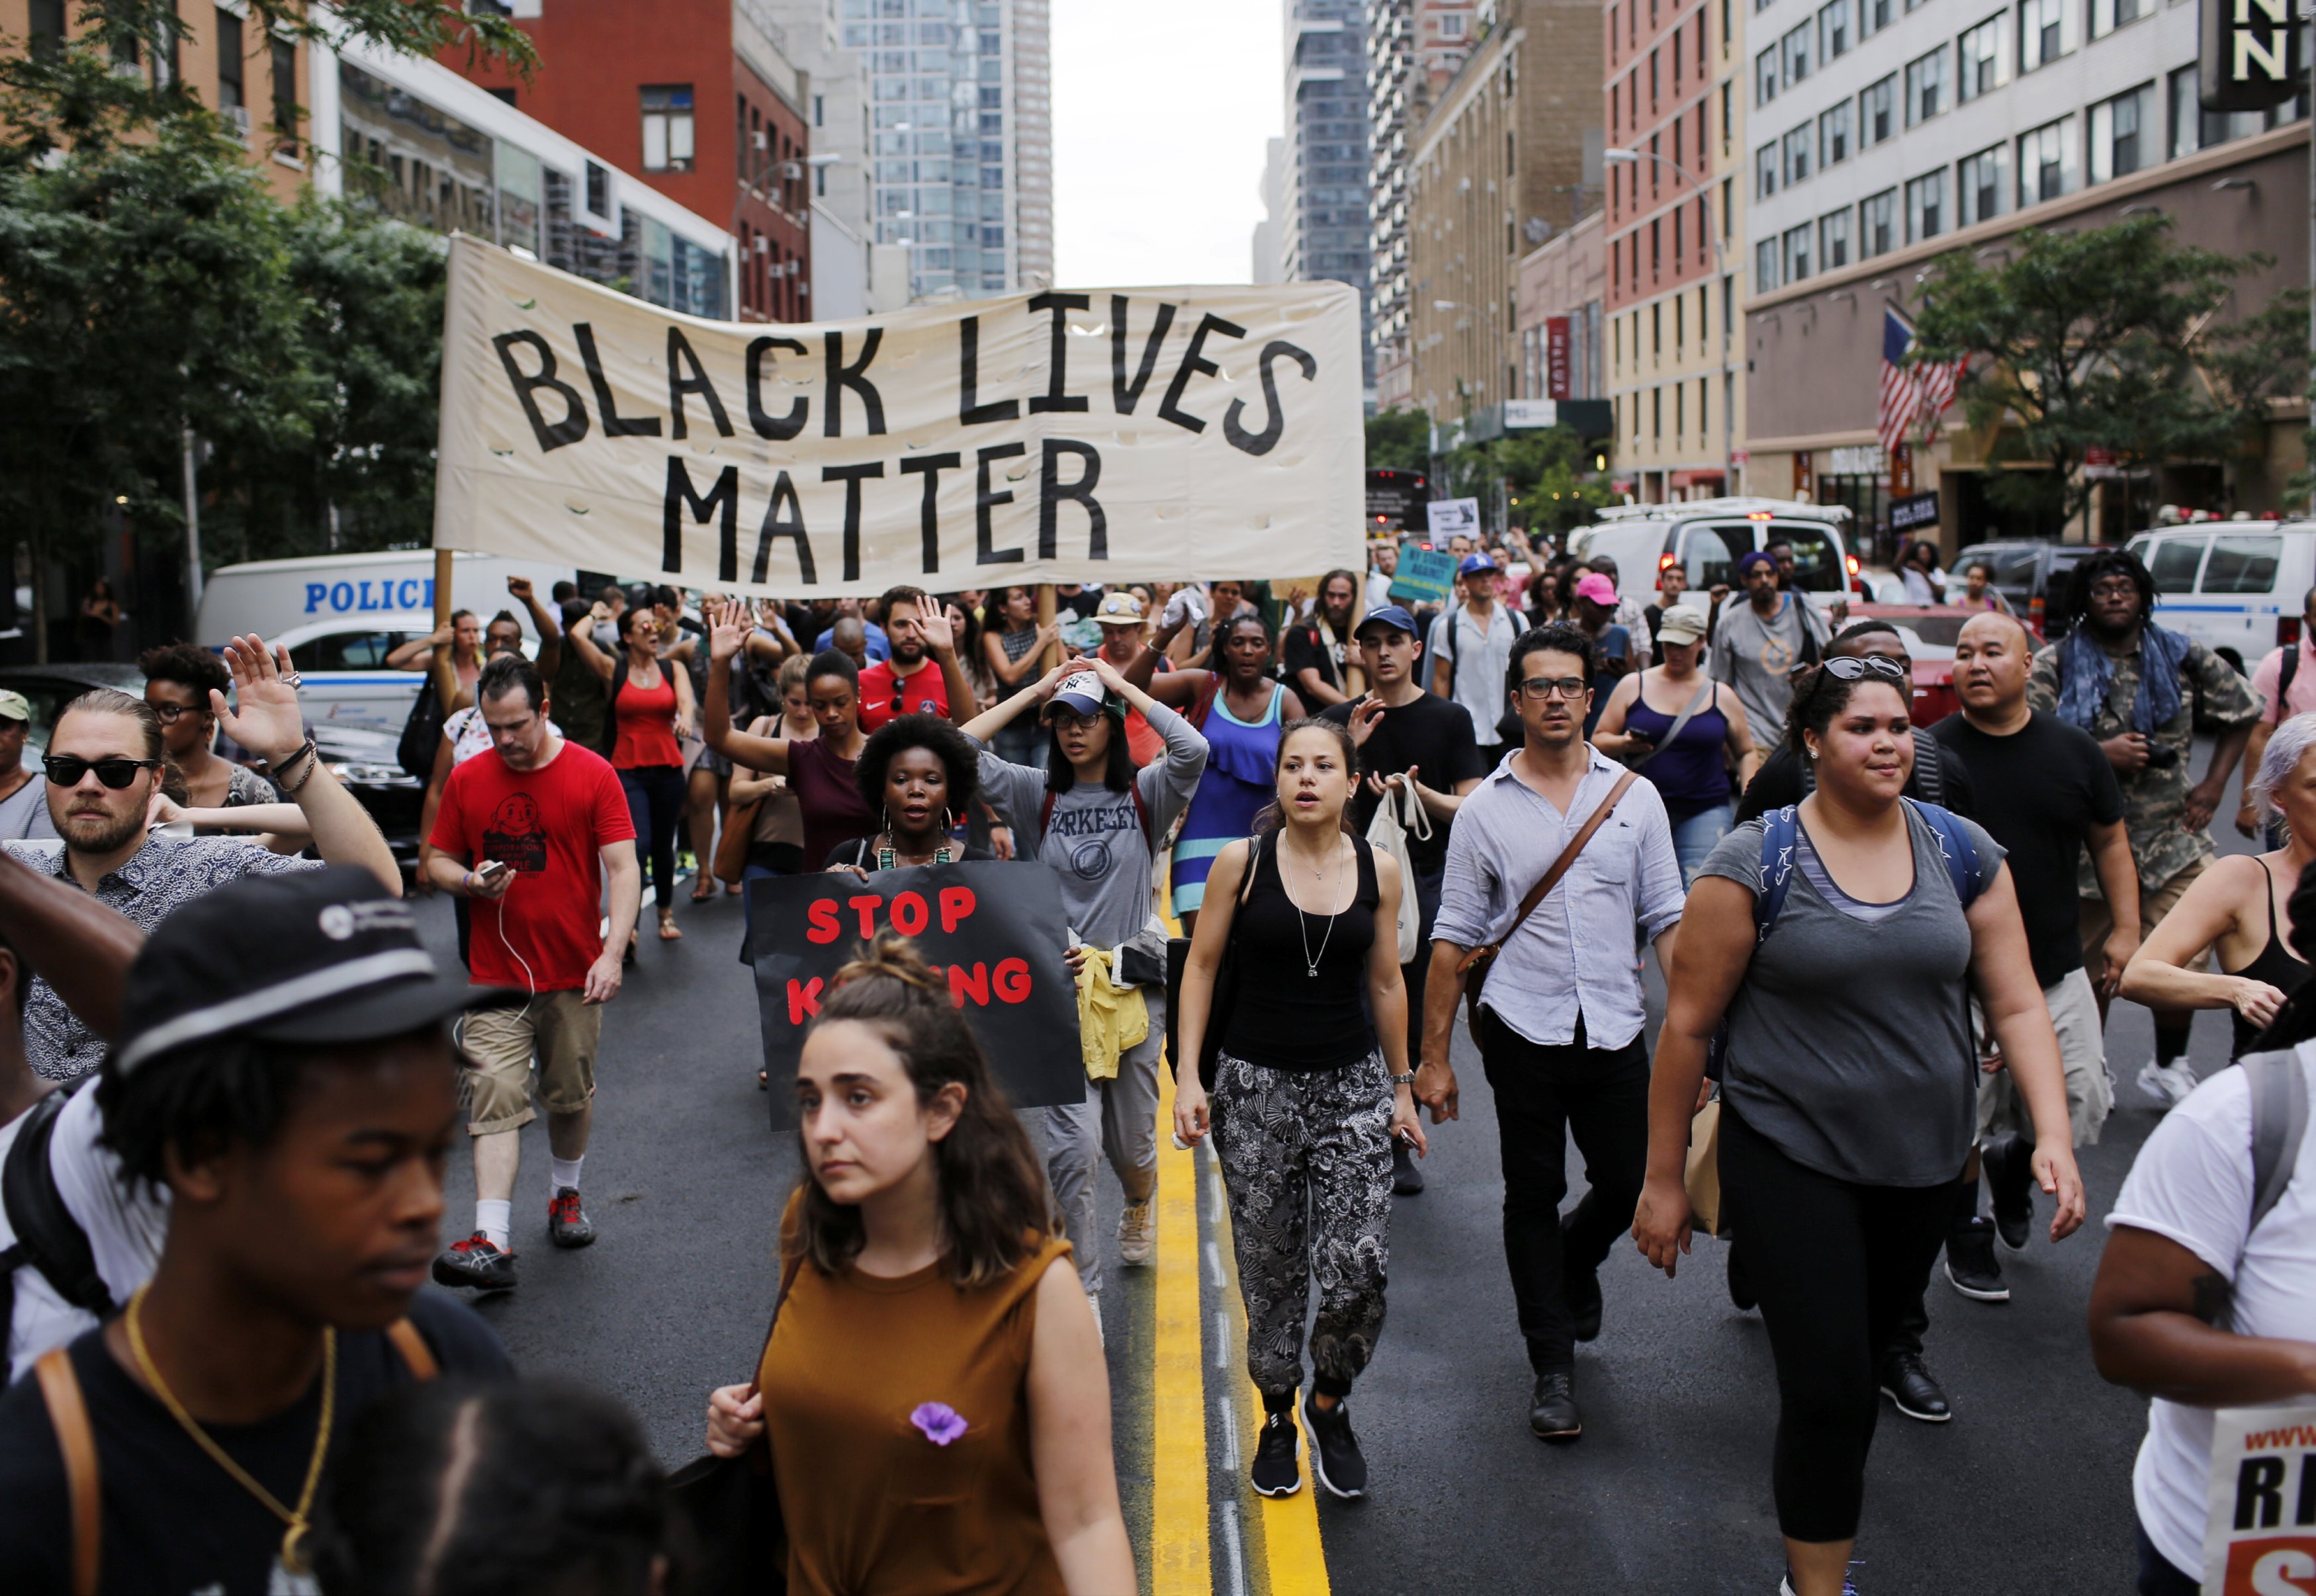 People take part in a protest for the killing of Alton Sterling and Philando Castile during a march along Manhattan's streets in New York, on July 7, 2016. (Eduardo Munoz—Reuters)